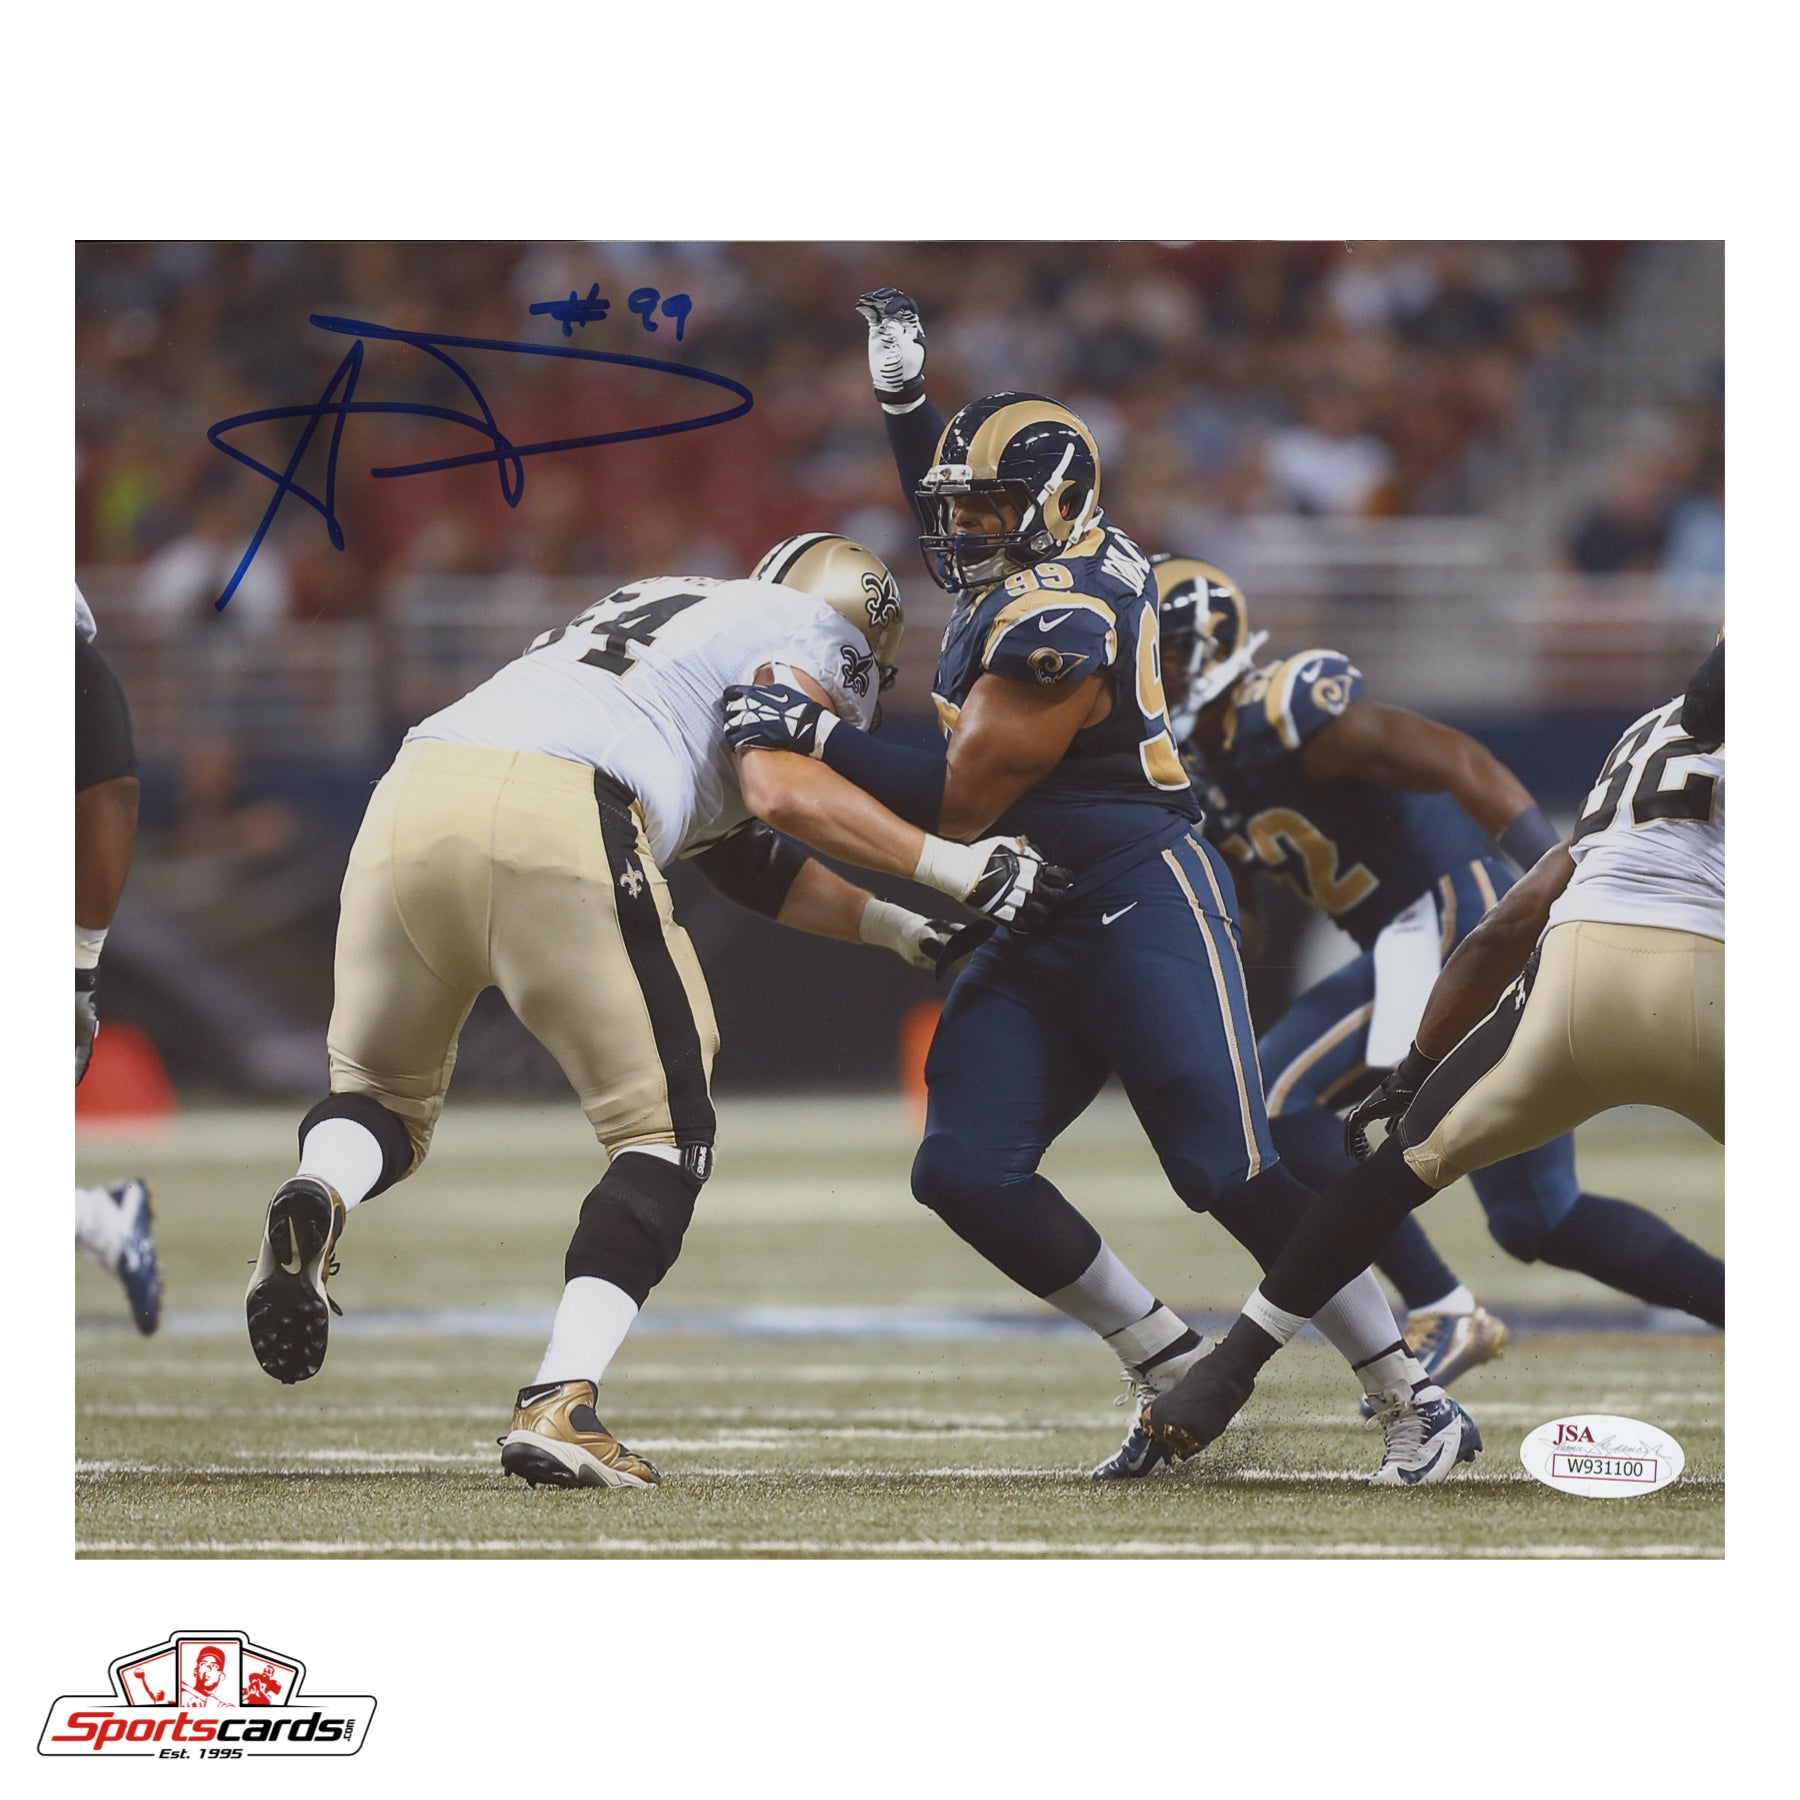 Aaron Donald "#99" Signed Autographed 8x10 Photograph JSA Witnessed COA